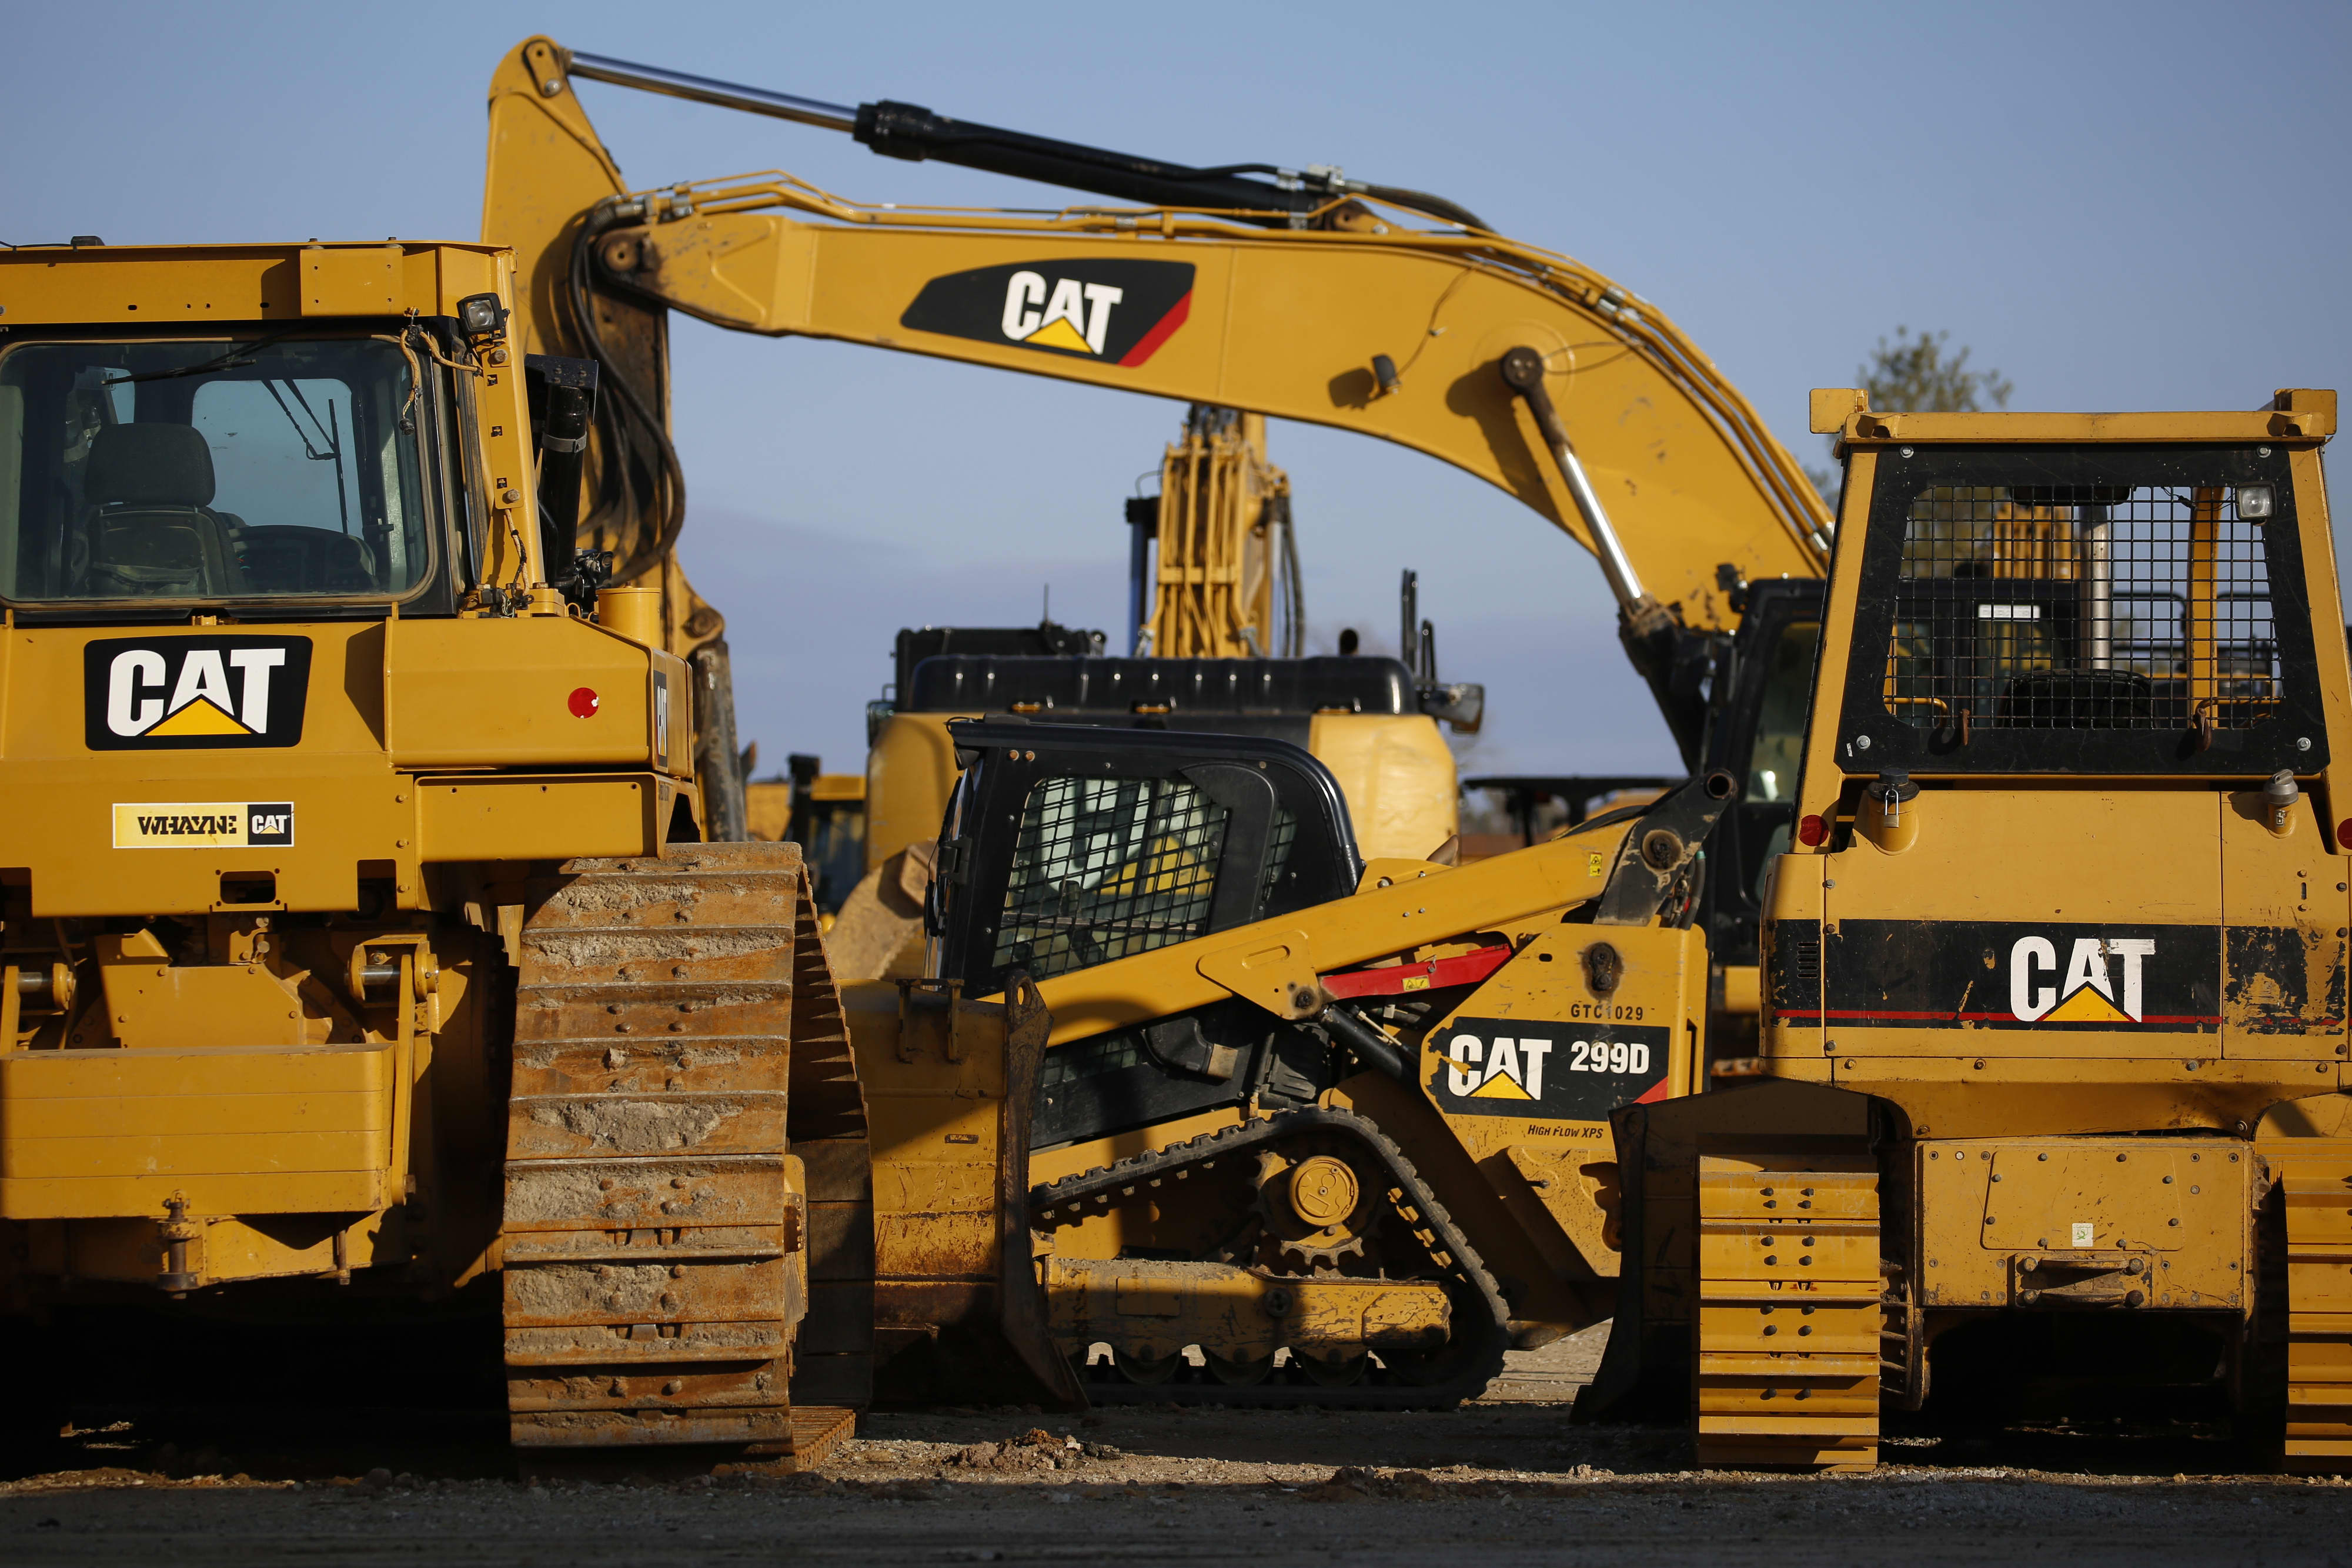 Rising commodities prices could be a tailwind for Caterpillar and these industrial names